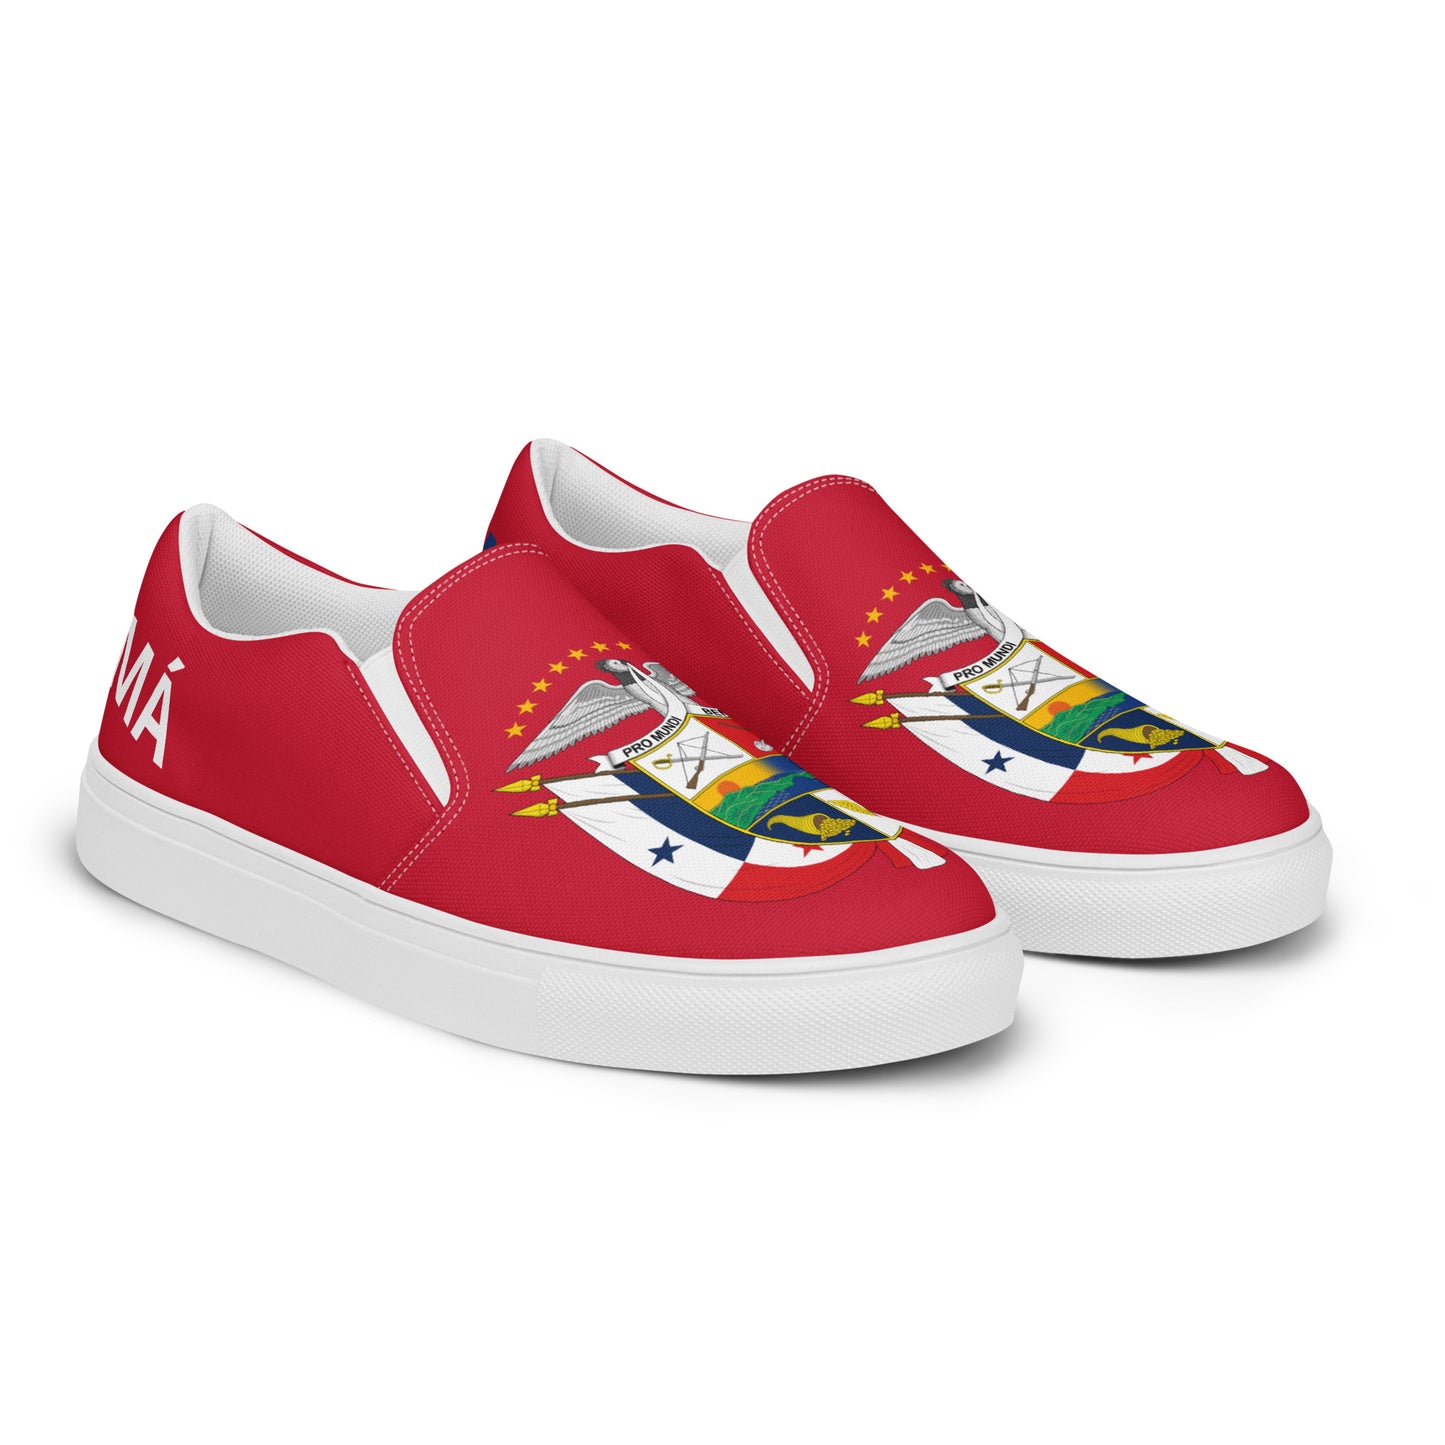 Panamá - Men - Red - Slip-on shoes